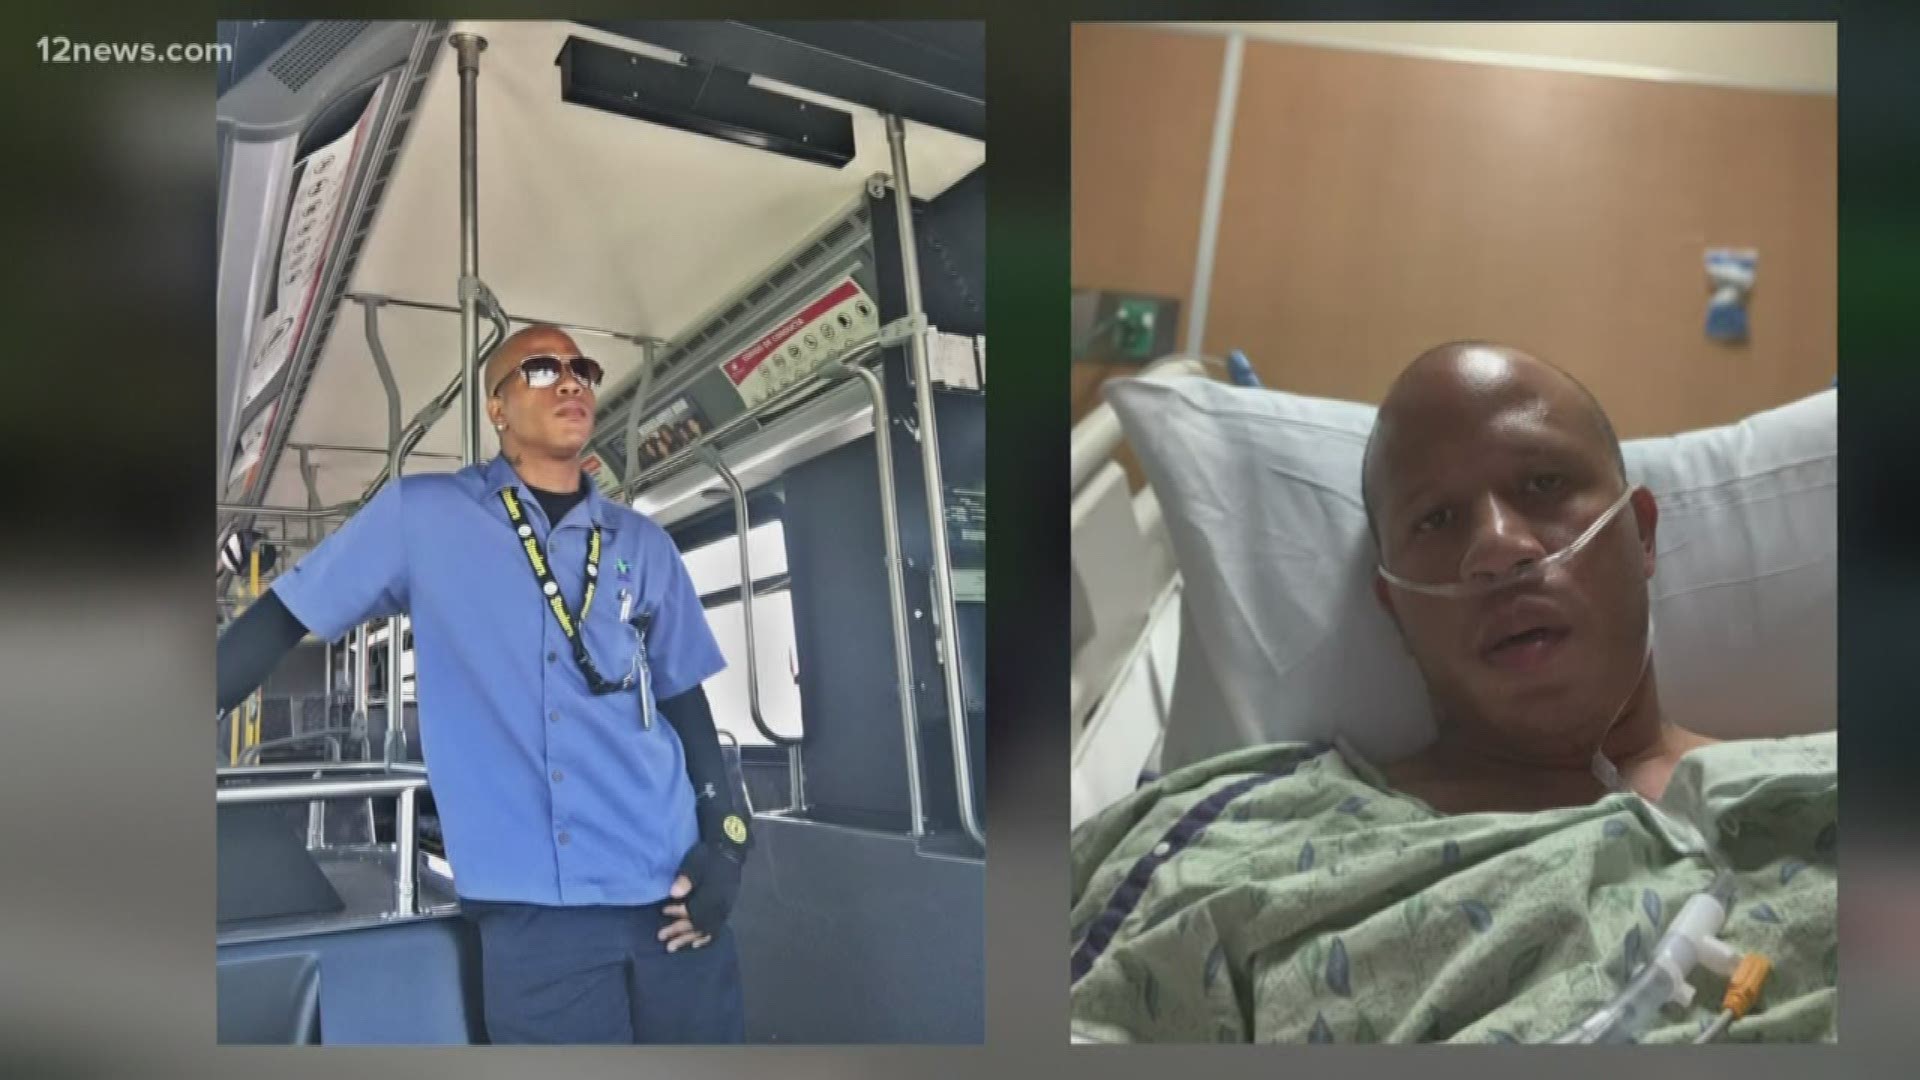 A bus driver is advocating for the safety of other transit workers after he came down with symptoms of COVID-19. He has since been hospitalized.